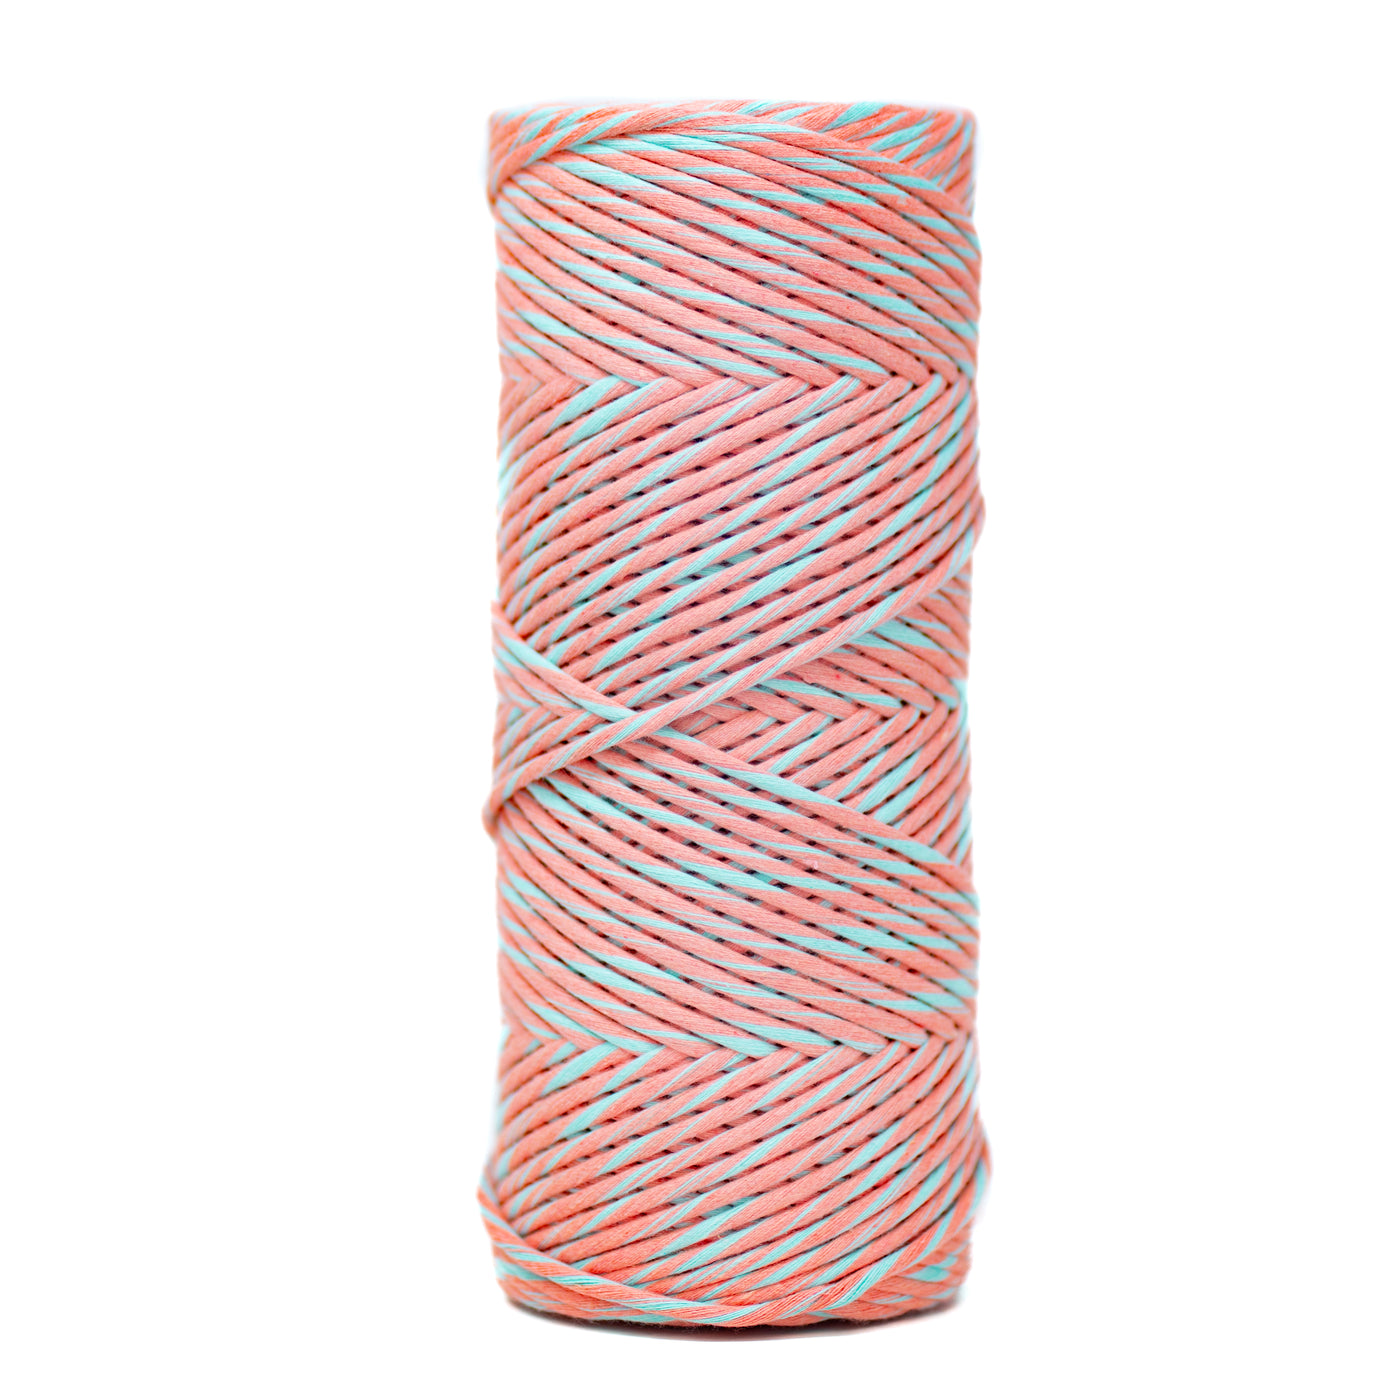 DUAL RECYCLED COTTON MACRAME CORD 4 MM - SINGLE STRAND - FRUIT PUNCH + BIMINI COLOR